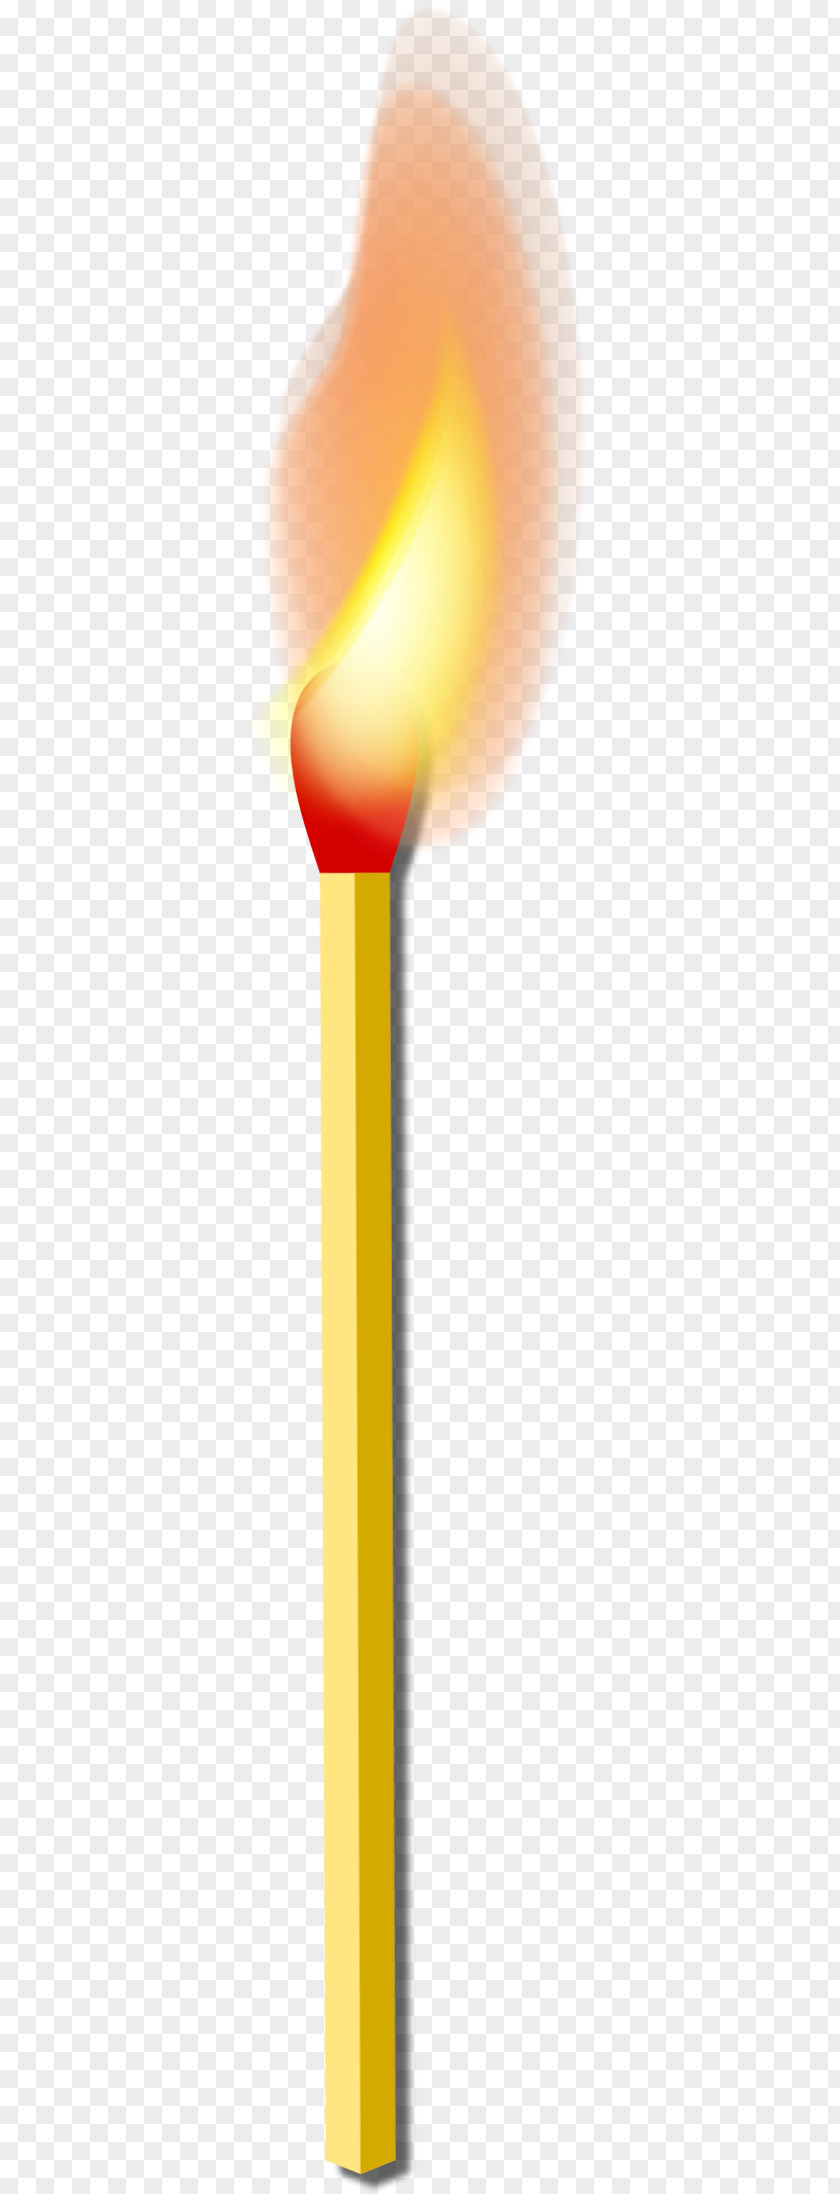 Striking A Match Fire Combustion Product Image PNG